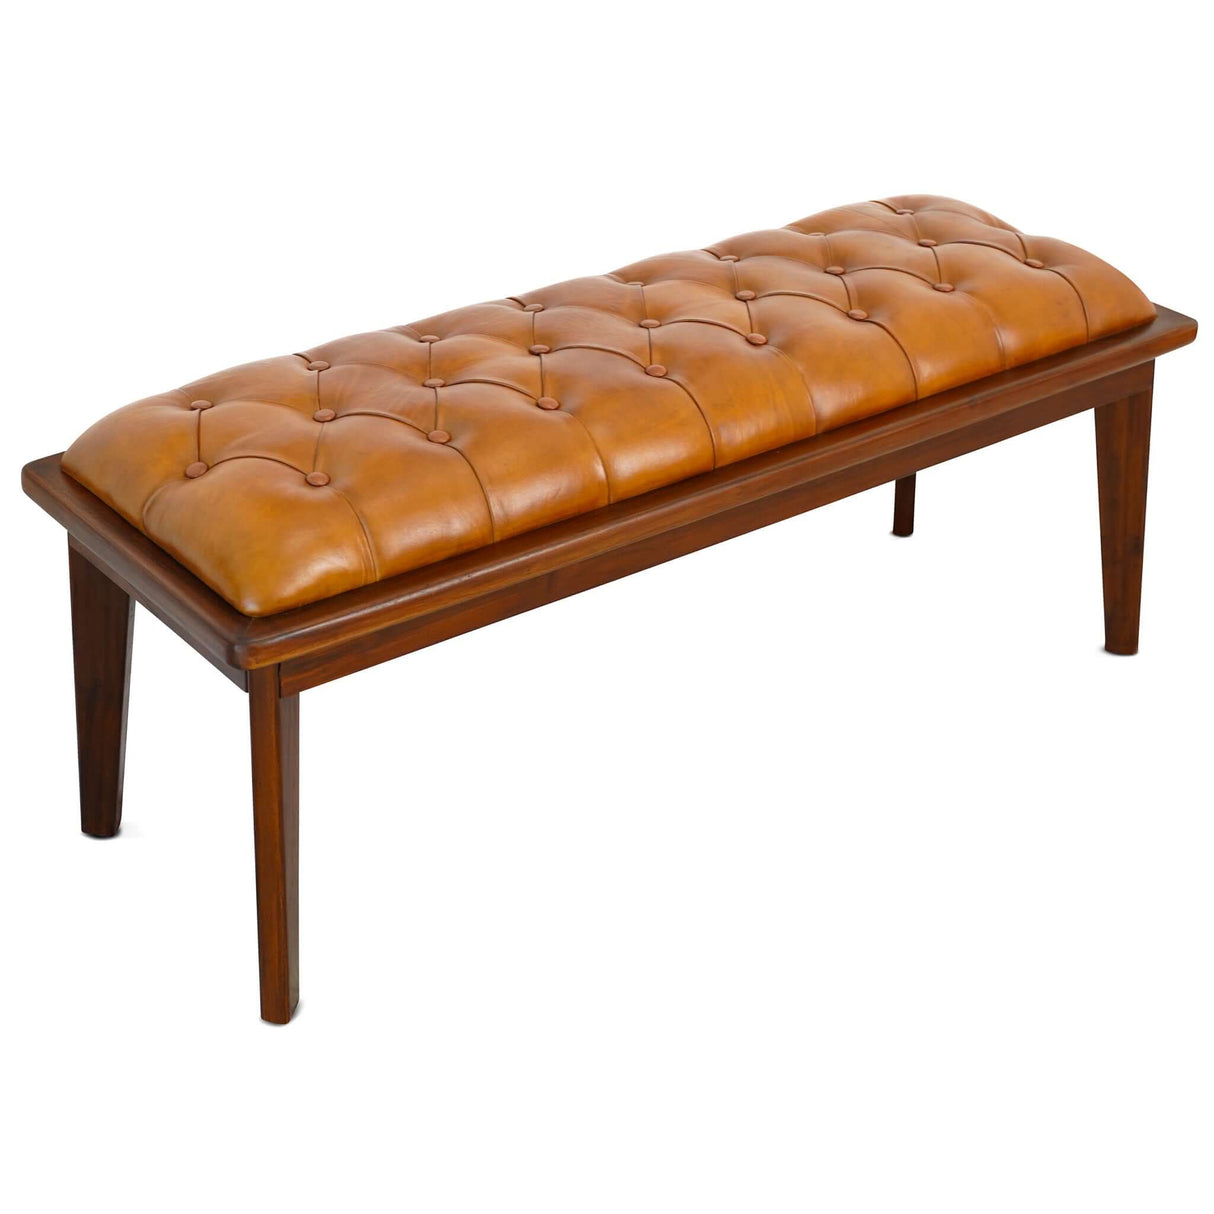 Arden Tan Leather Bench With Buttons